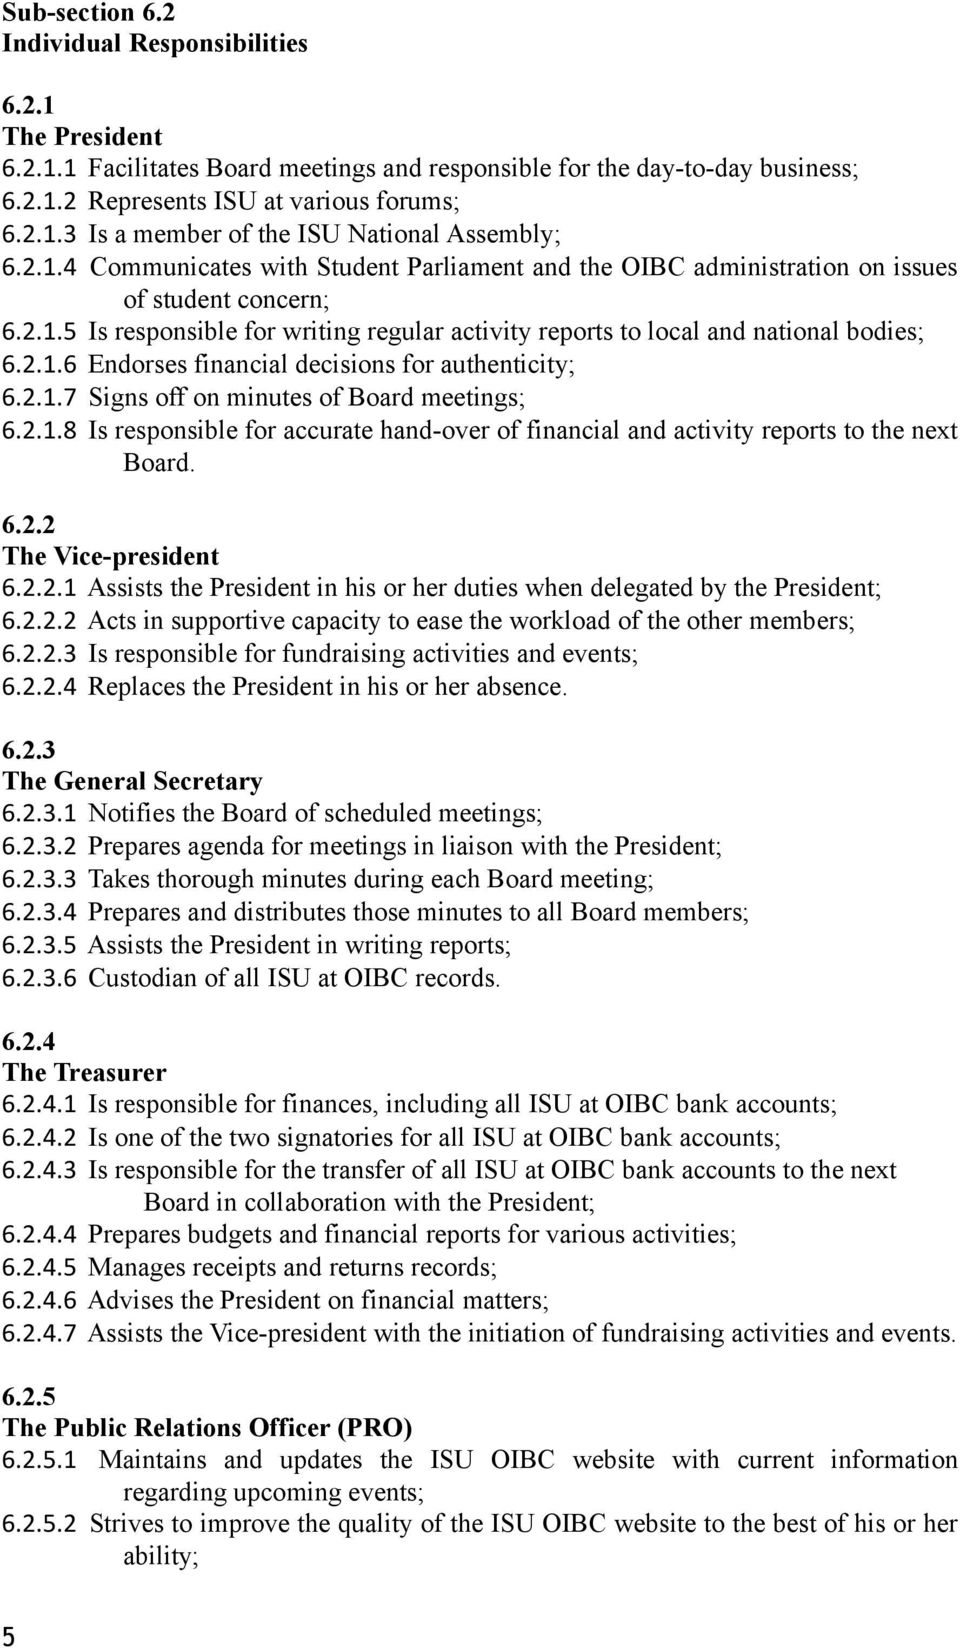 2.1.7 Signs off on minutes of Board meetings; 6.2.1.8 Is responsible for accurate hand-over of financial and activity reports to the next Board. 6.2.2 The Vice-president 6.2.2.1 Assists the President in his or her duties when delegated by the President; 6.